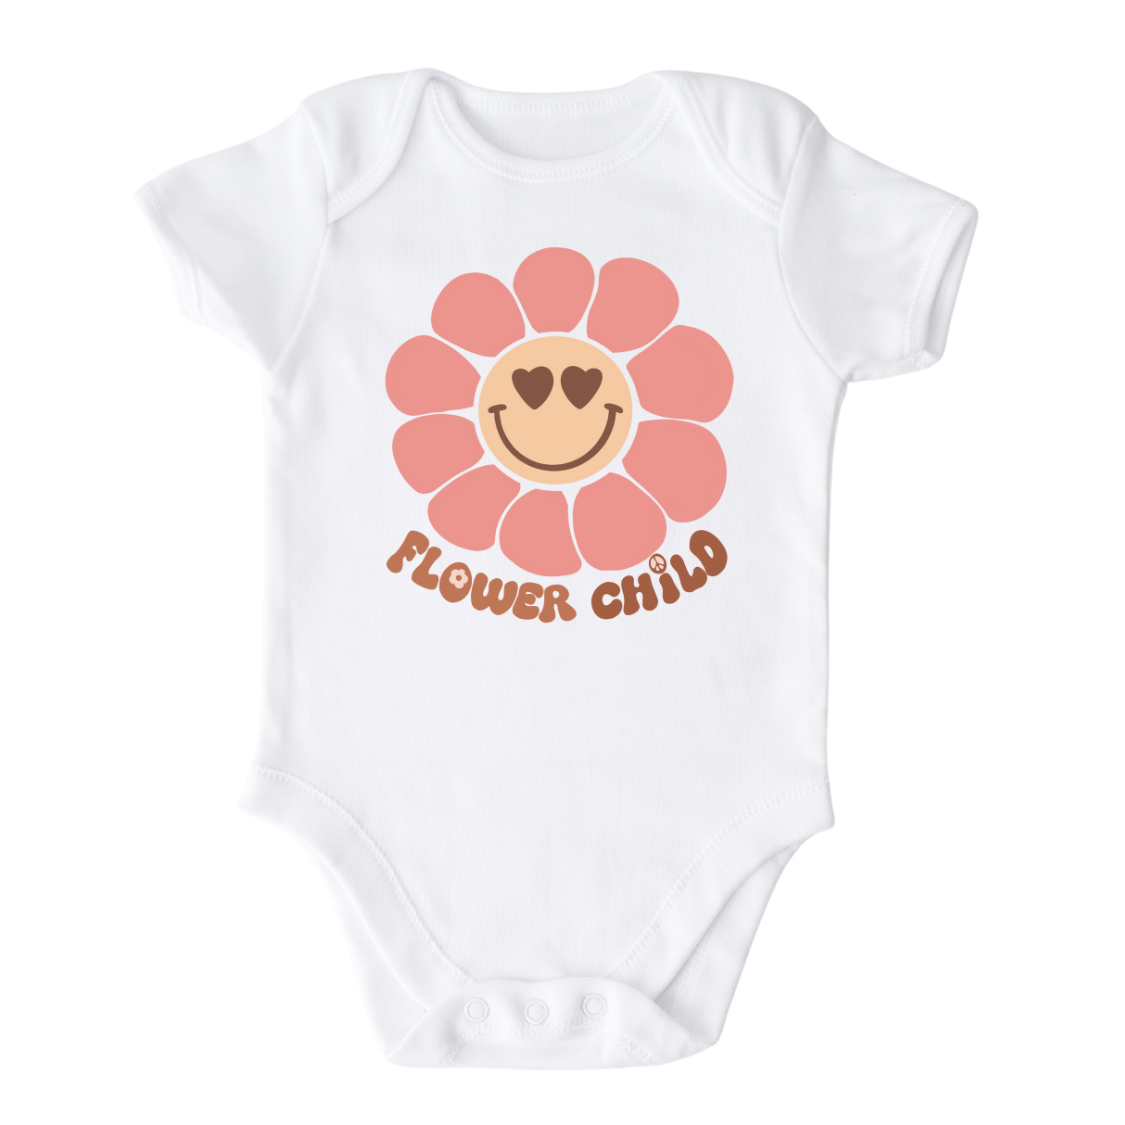 Baby Bodysuit with a cute flower graphic and text 'Flower Child' - Express your child's free-spirited style with this adorable flower-themed tee, perfect for little fashionistas. 